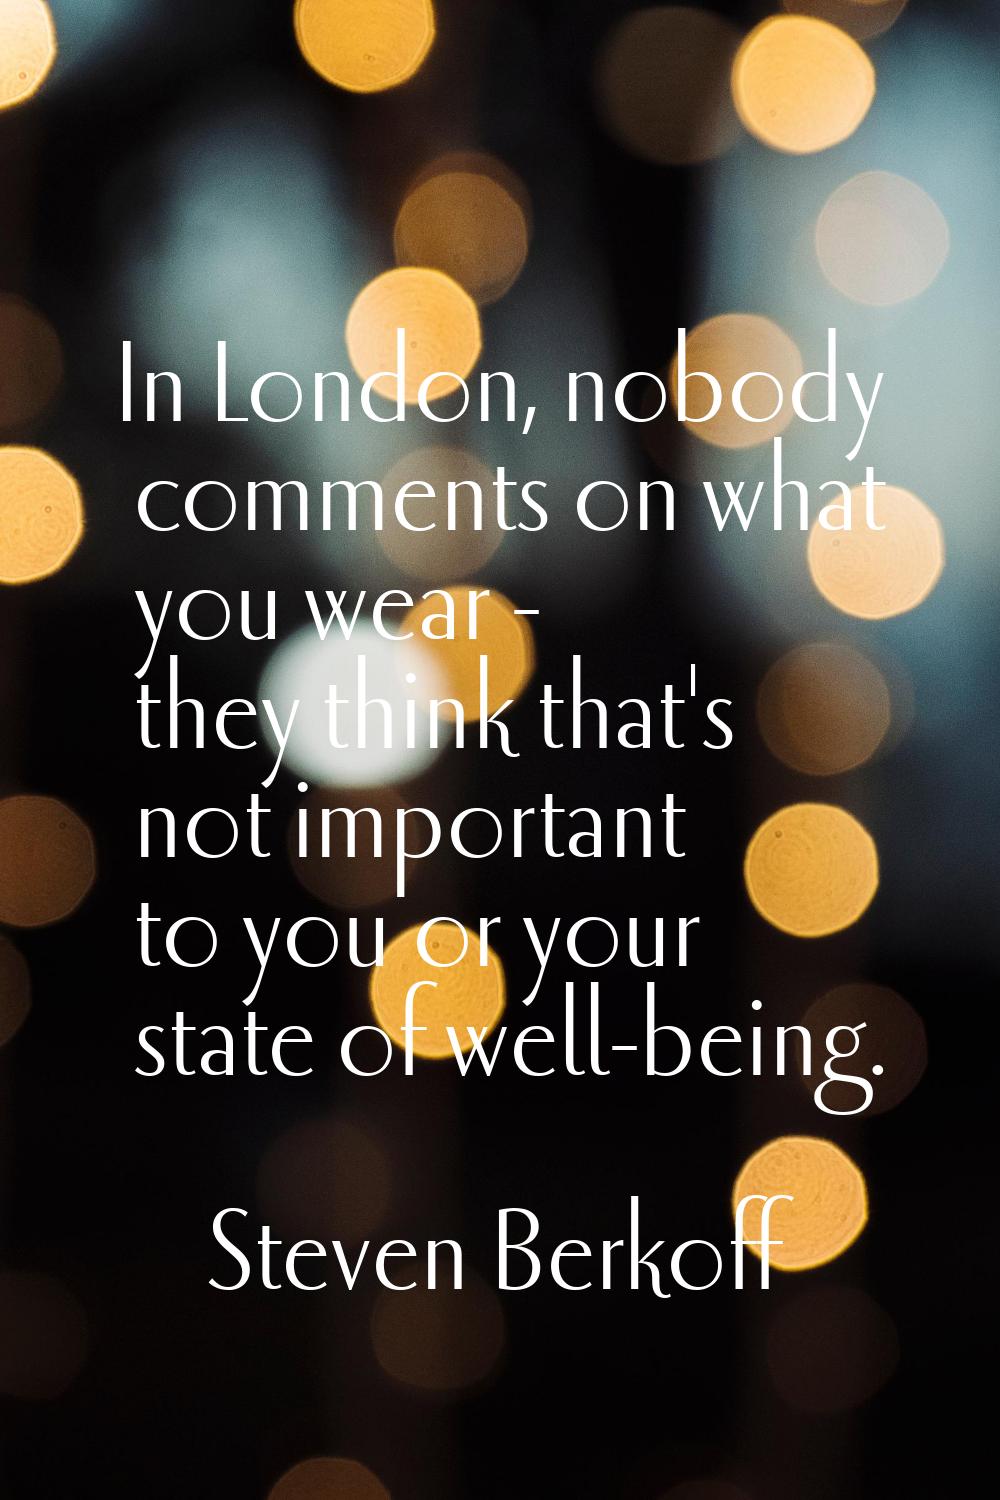 In London, nobody comments on what you wear - they think that's not important to you or your state 